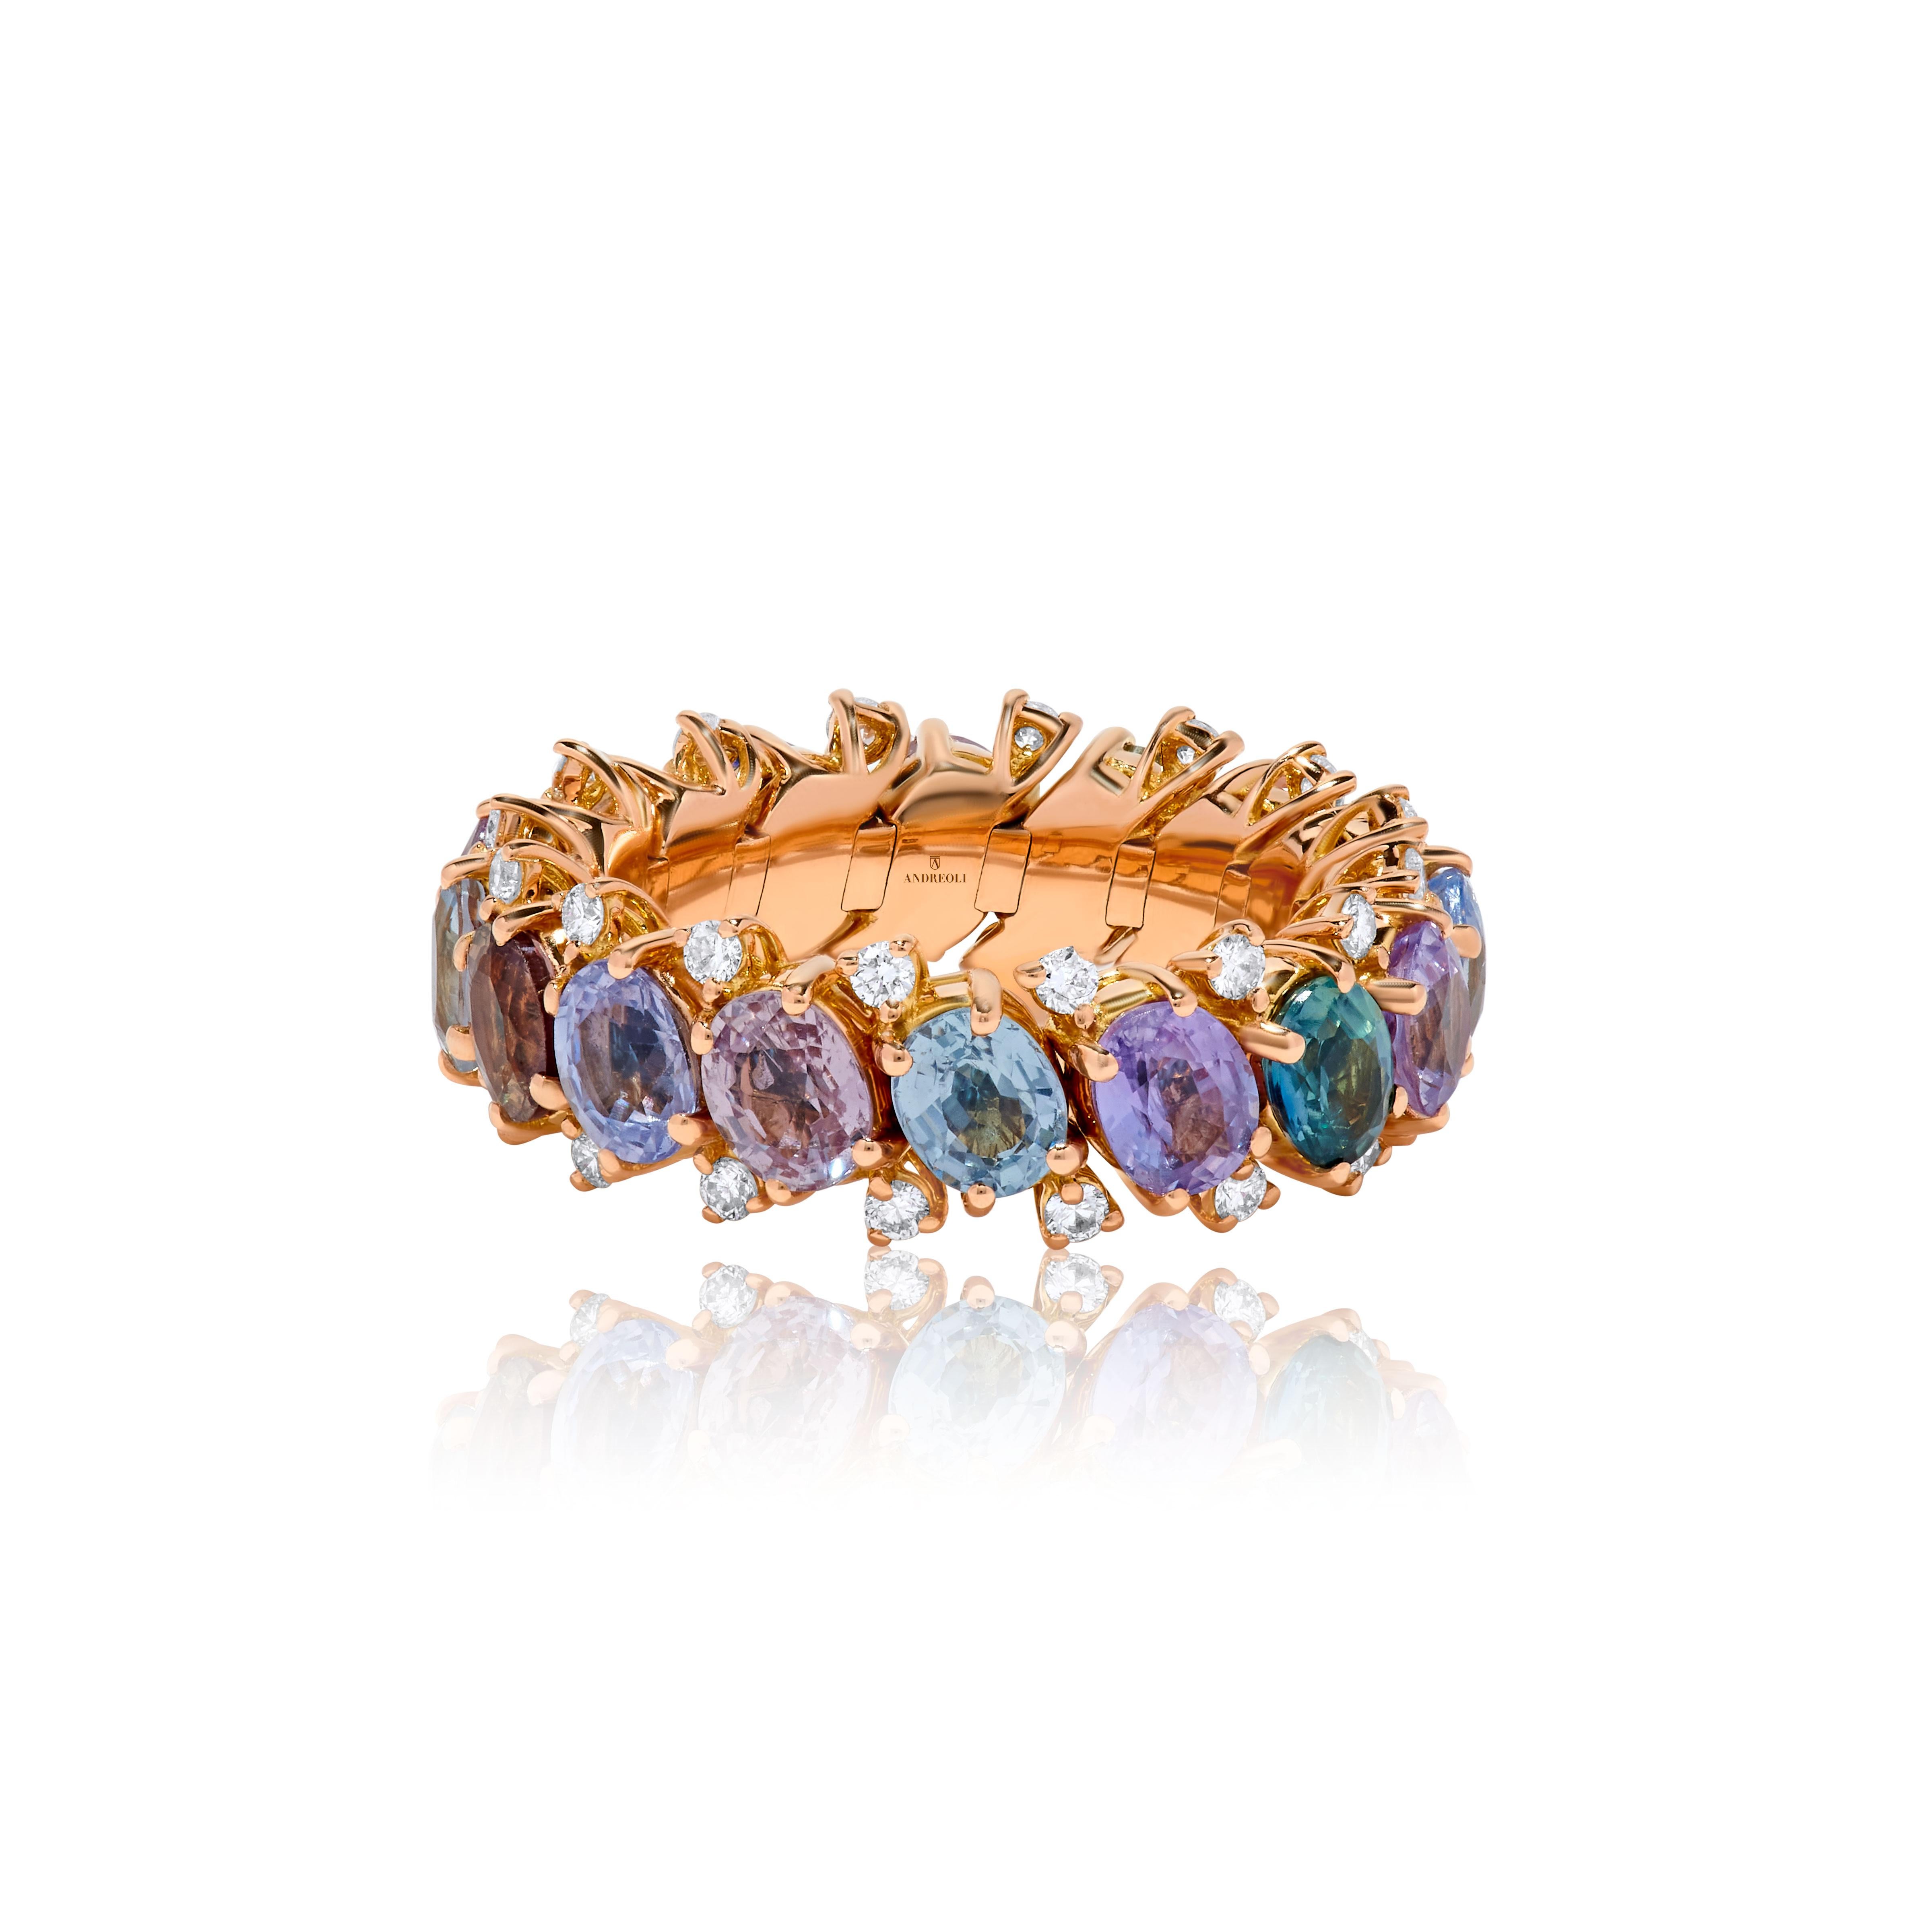 Andreoli Diamond Mixed Sapphire 18 Karat Rose Gold Stretchy Ring

This ring features:
- 0.54 Carat Diamond
- 7.21 Carat Mixed Sapphire
- 7.70 Gram 18K Rose Gold
- Stretchy Band
- Made In Italy